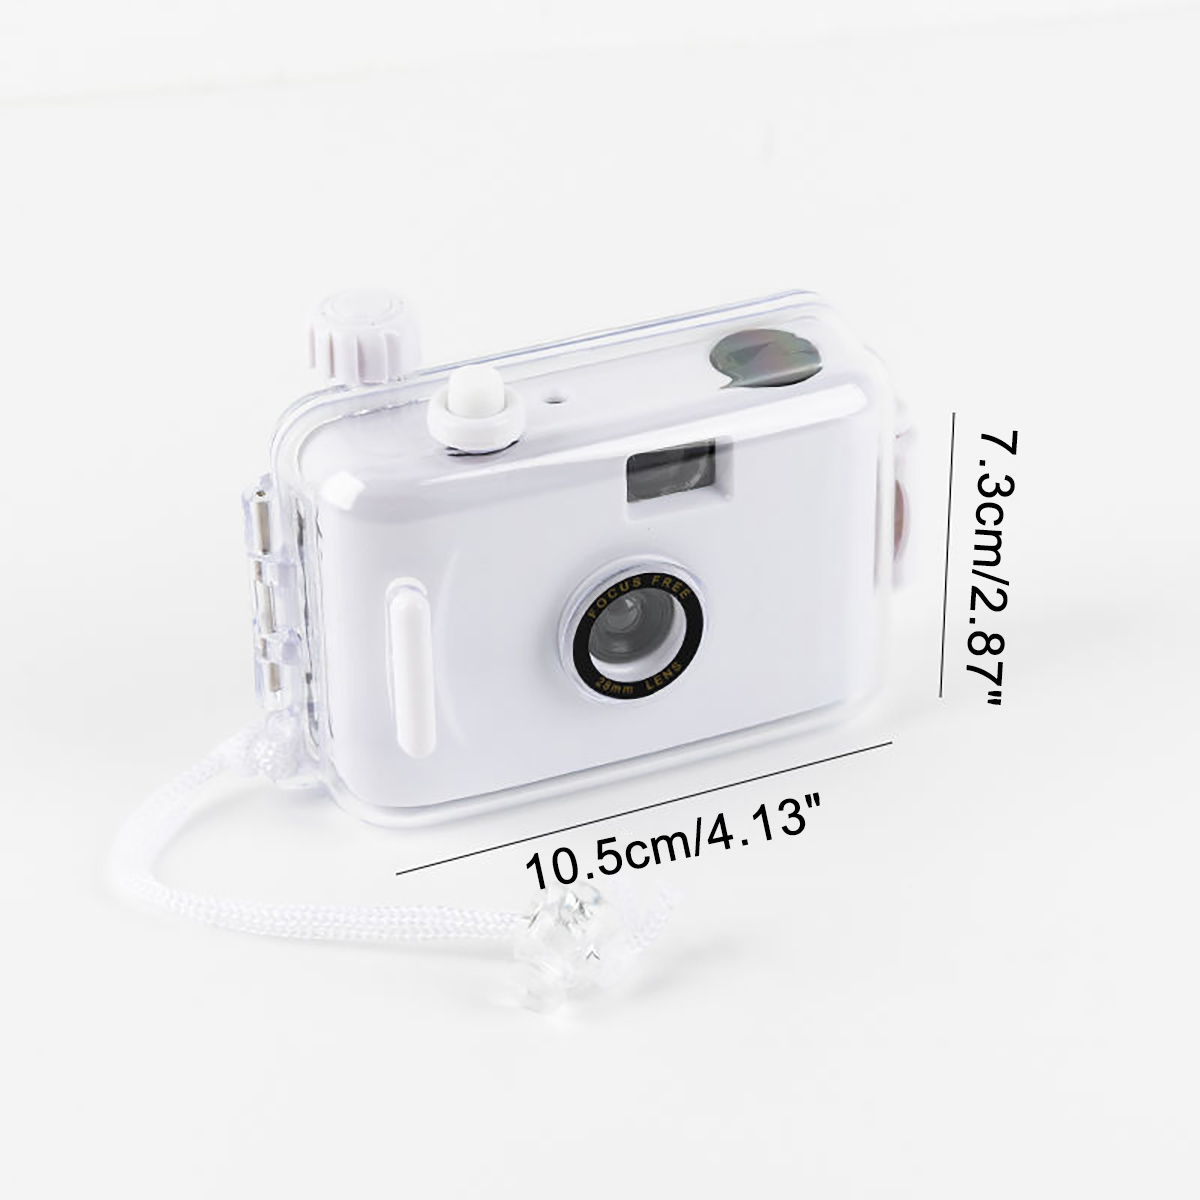 Waterproof-Disposable-Camera-Portable-Film-Camera-With-DIY-Case-for-Graduation-Trip-Christmas-1952625-9